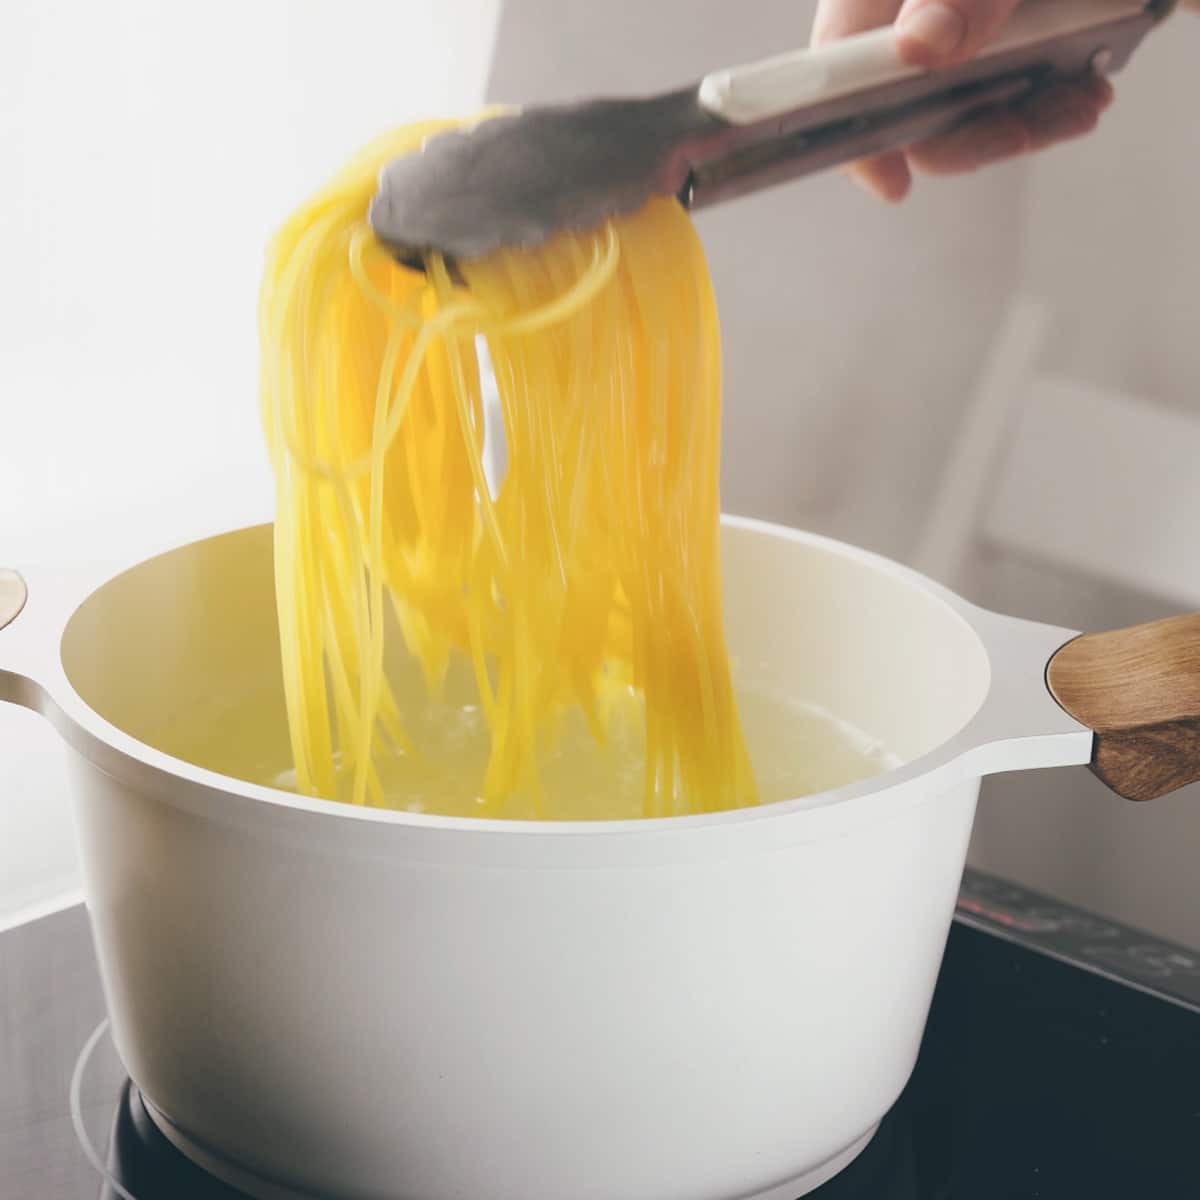 We've all been there before: you overcook your pasta and now it's a sticky, gooey mess. But before you toss it in the trash, don't give up just yet! There are several ways to fix overcooked pasta so it's once again edible. Keep reading for tips on how to revive your dinner disaster.